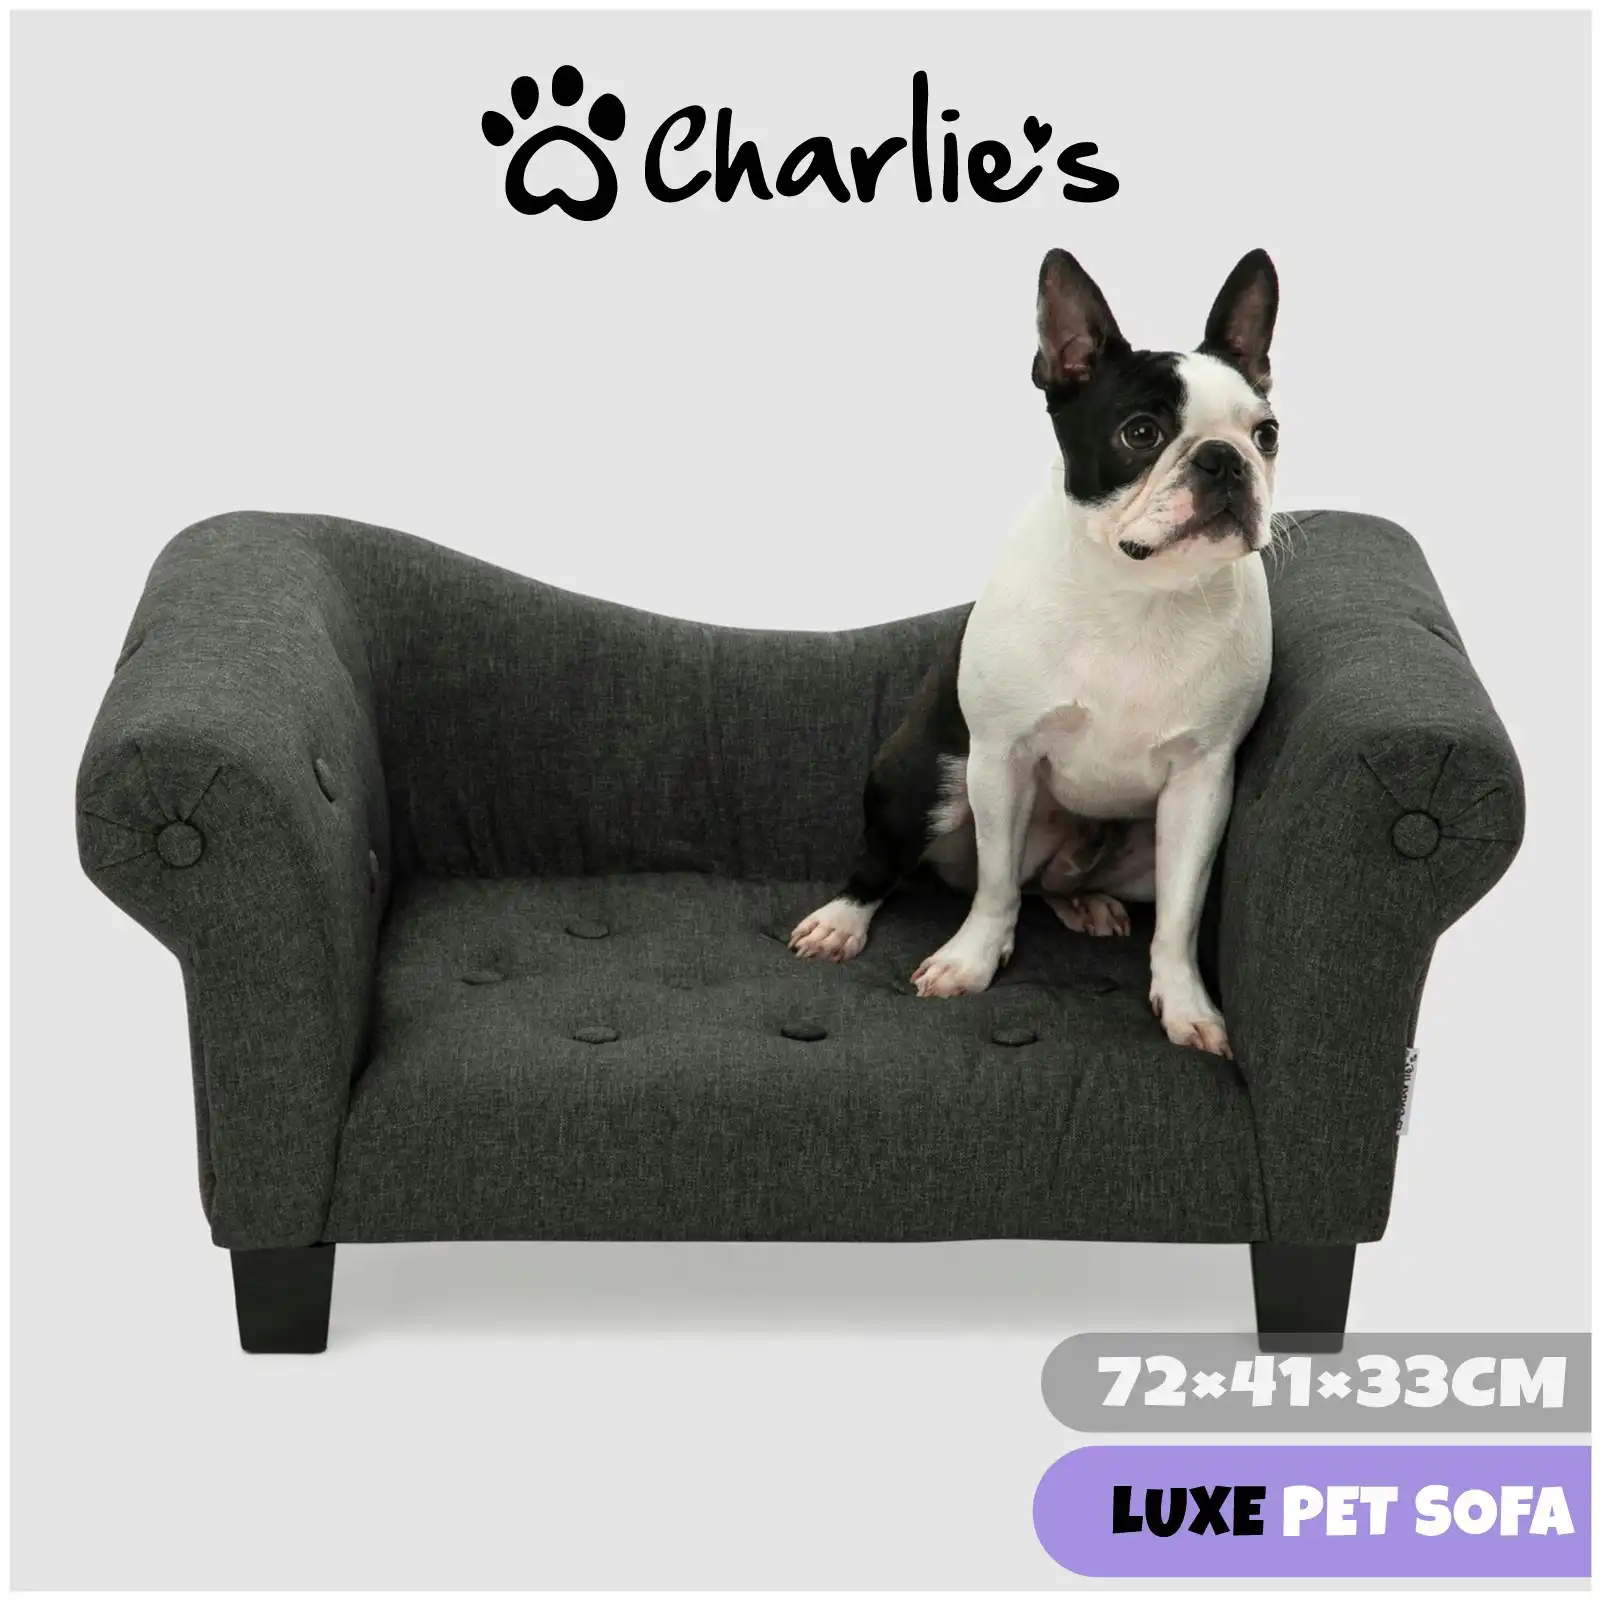 Charlie's Luxe Dog Sofa Charcoal 72 x 41 x 33cm